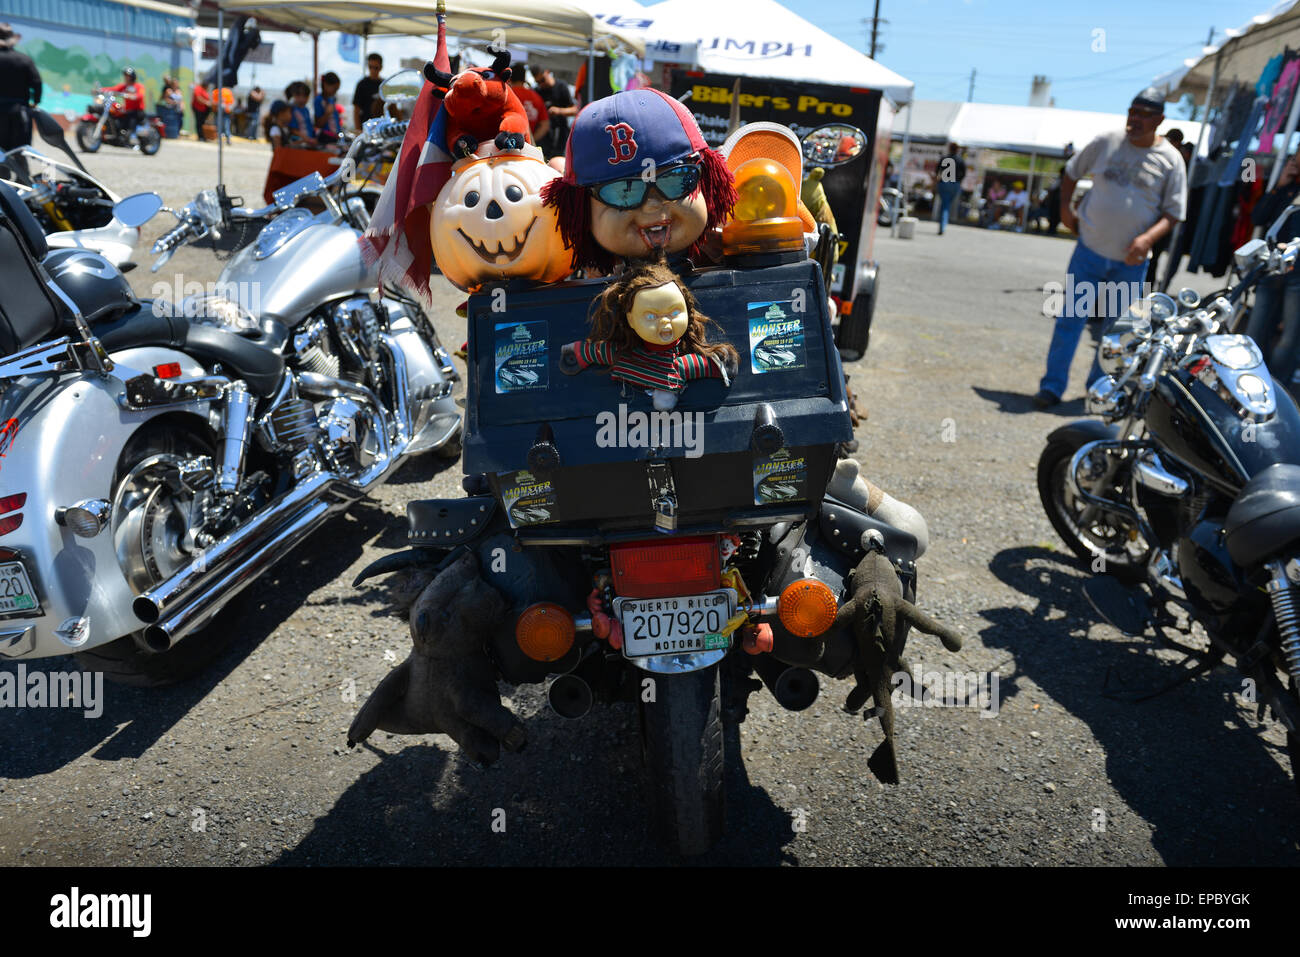 Detail of the back of a motorcycle at a biker event in Ponce, Puerto Rico. Caribbean Island. USA territory. Stock Photo